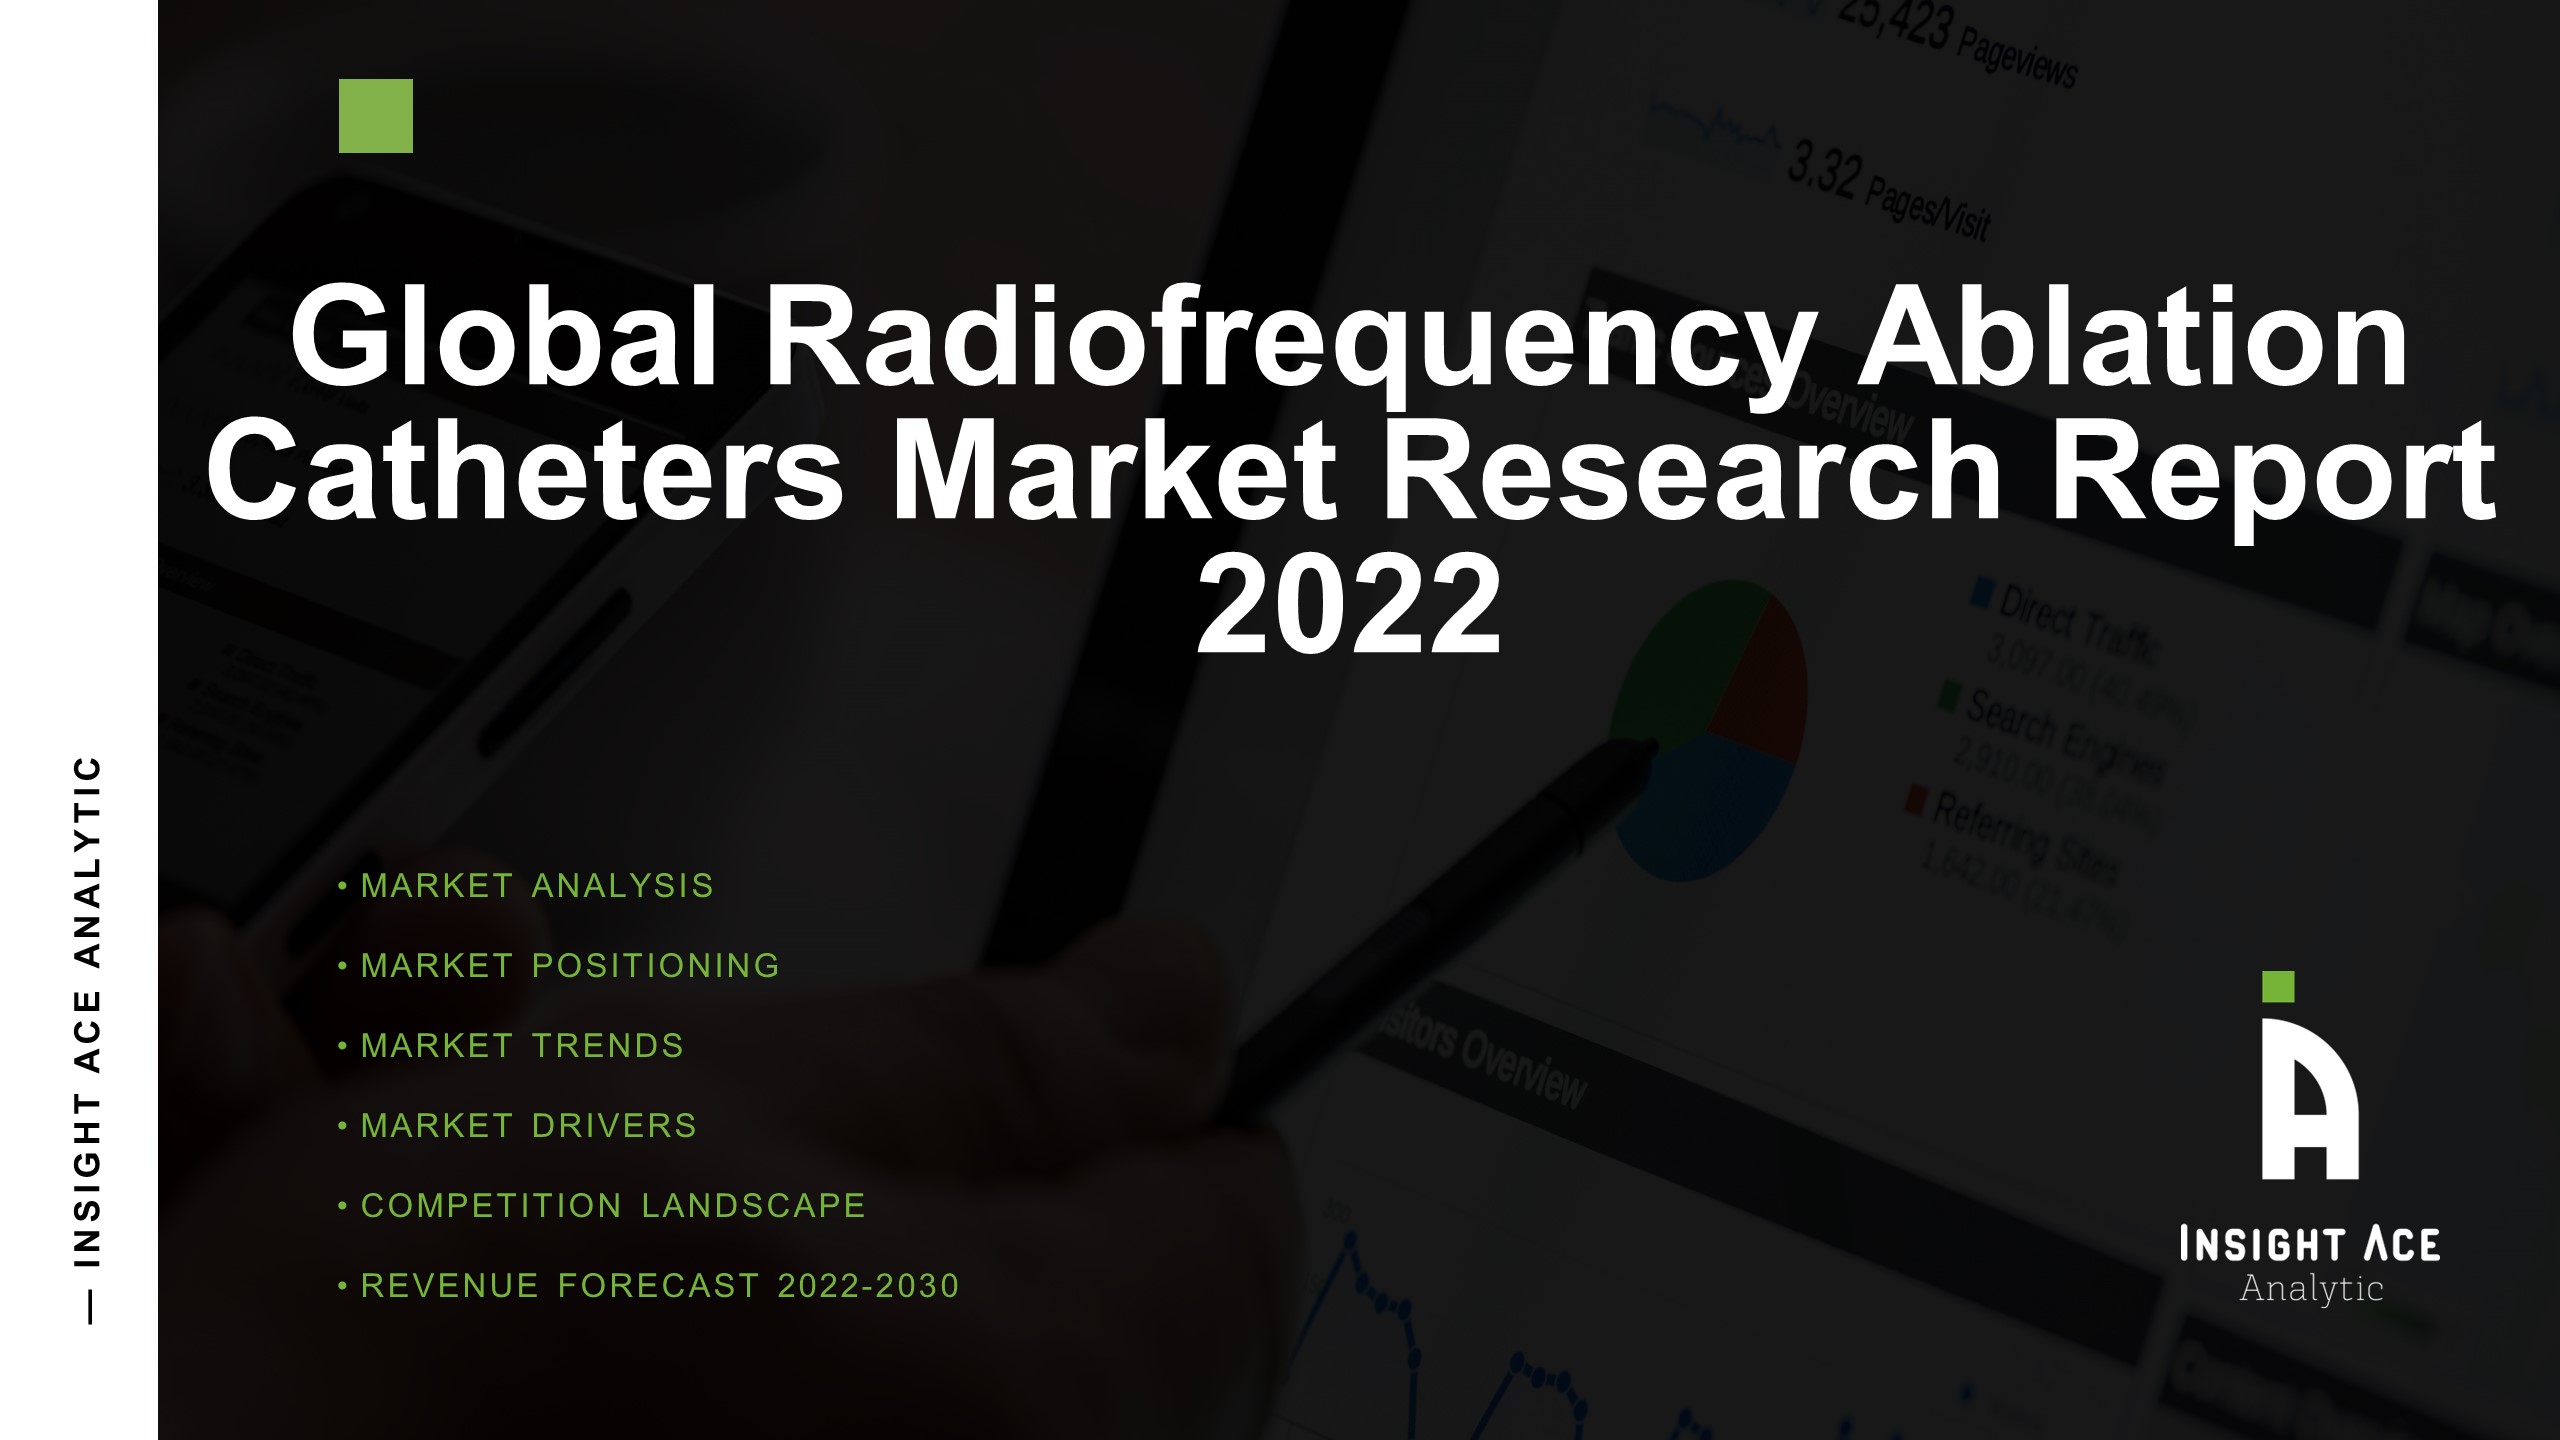 Global Radiofrequency Ablation Catheters Market